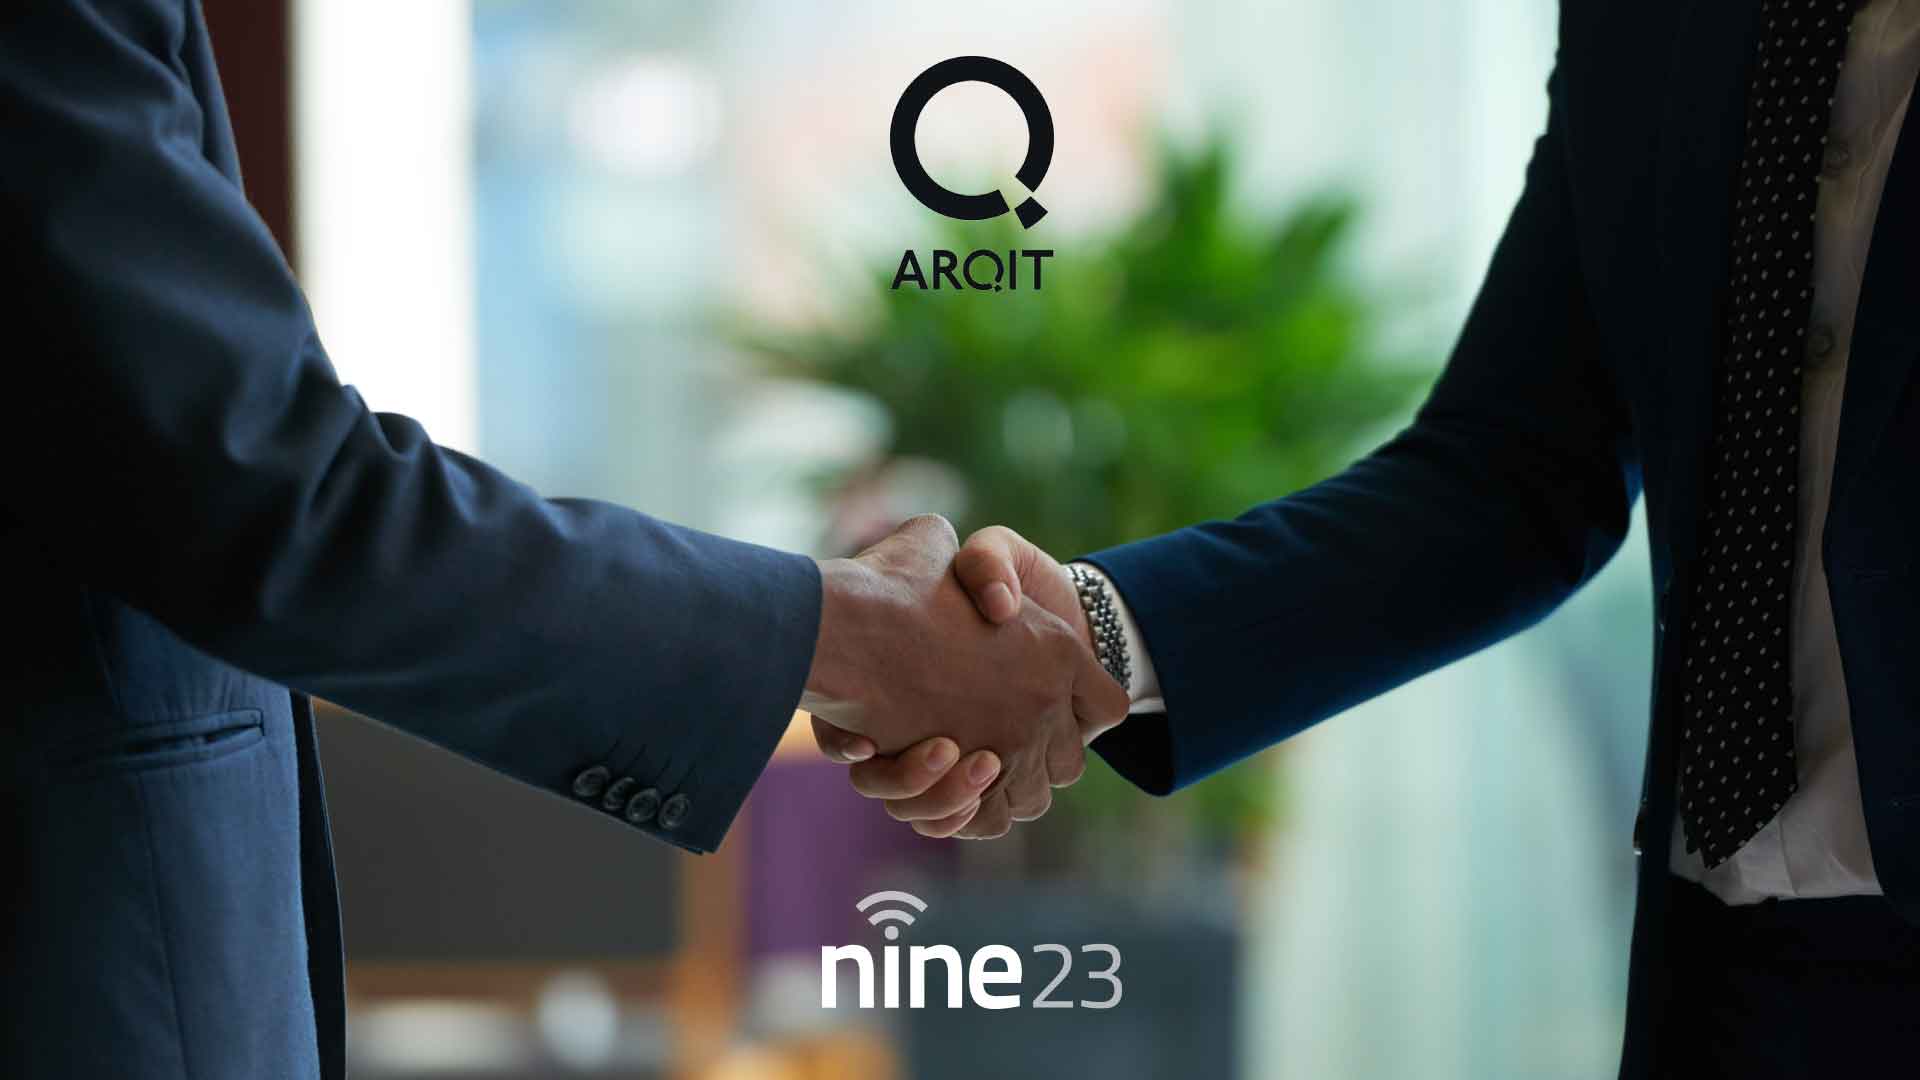 Arqit partners with Nine23 to provide secure cloud services on G-Cloud 13 for UK Government